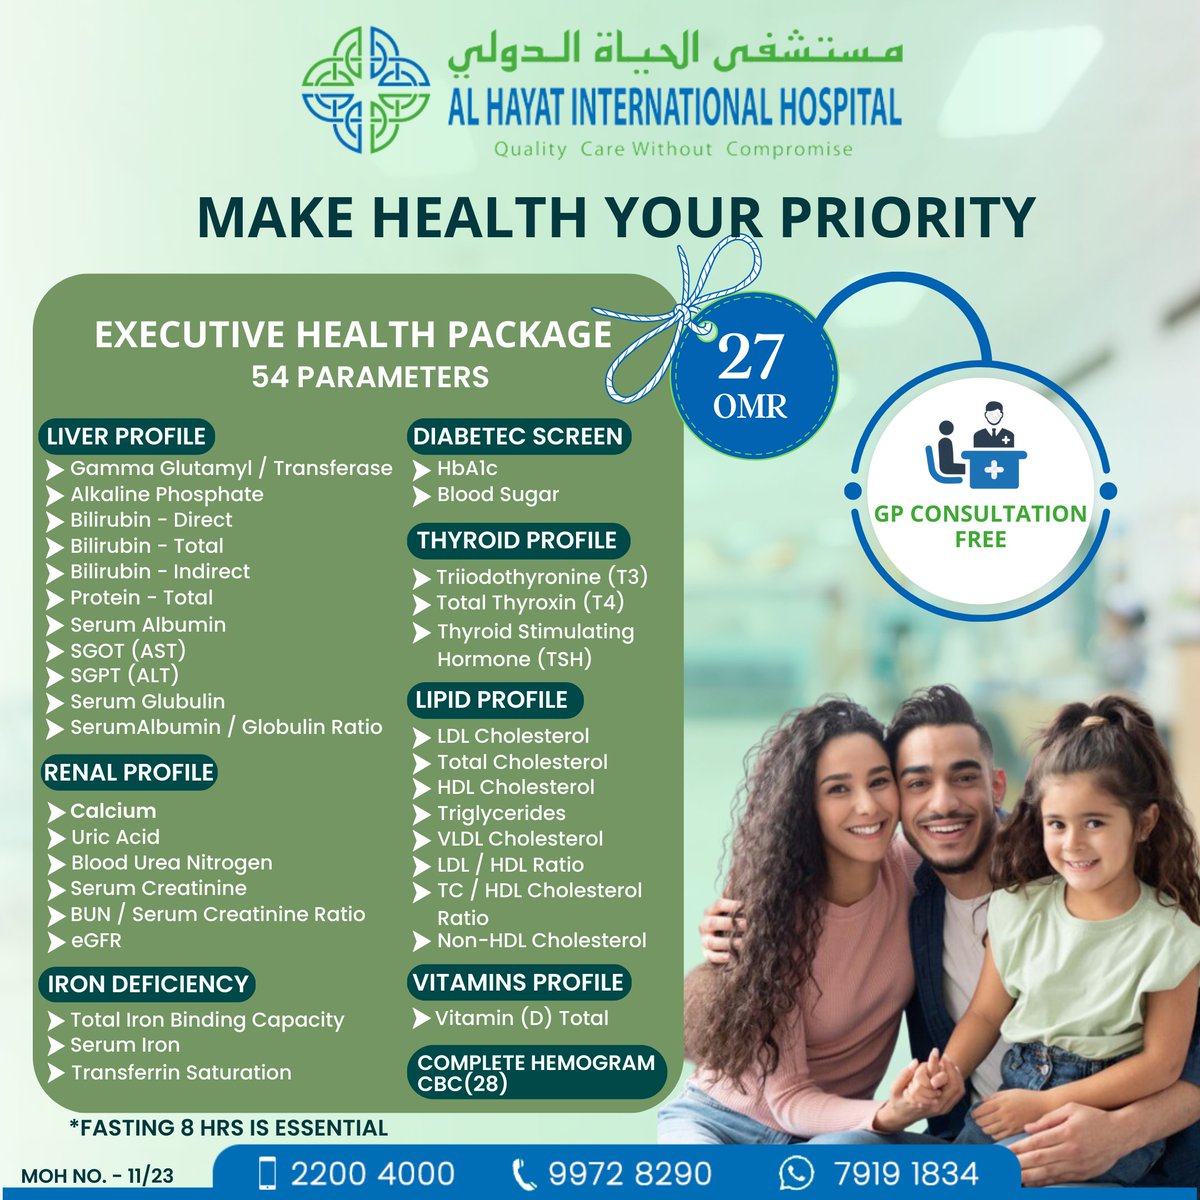 We're excited to announce our special Basic and Executive Health packages, which include a Free Consultation, designed specially to help you stay healthy throughout the summer months.
#healthcheckup #healthpackages